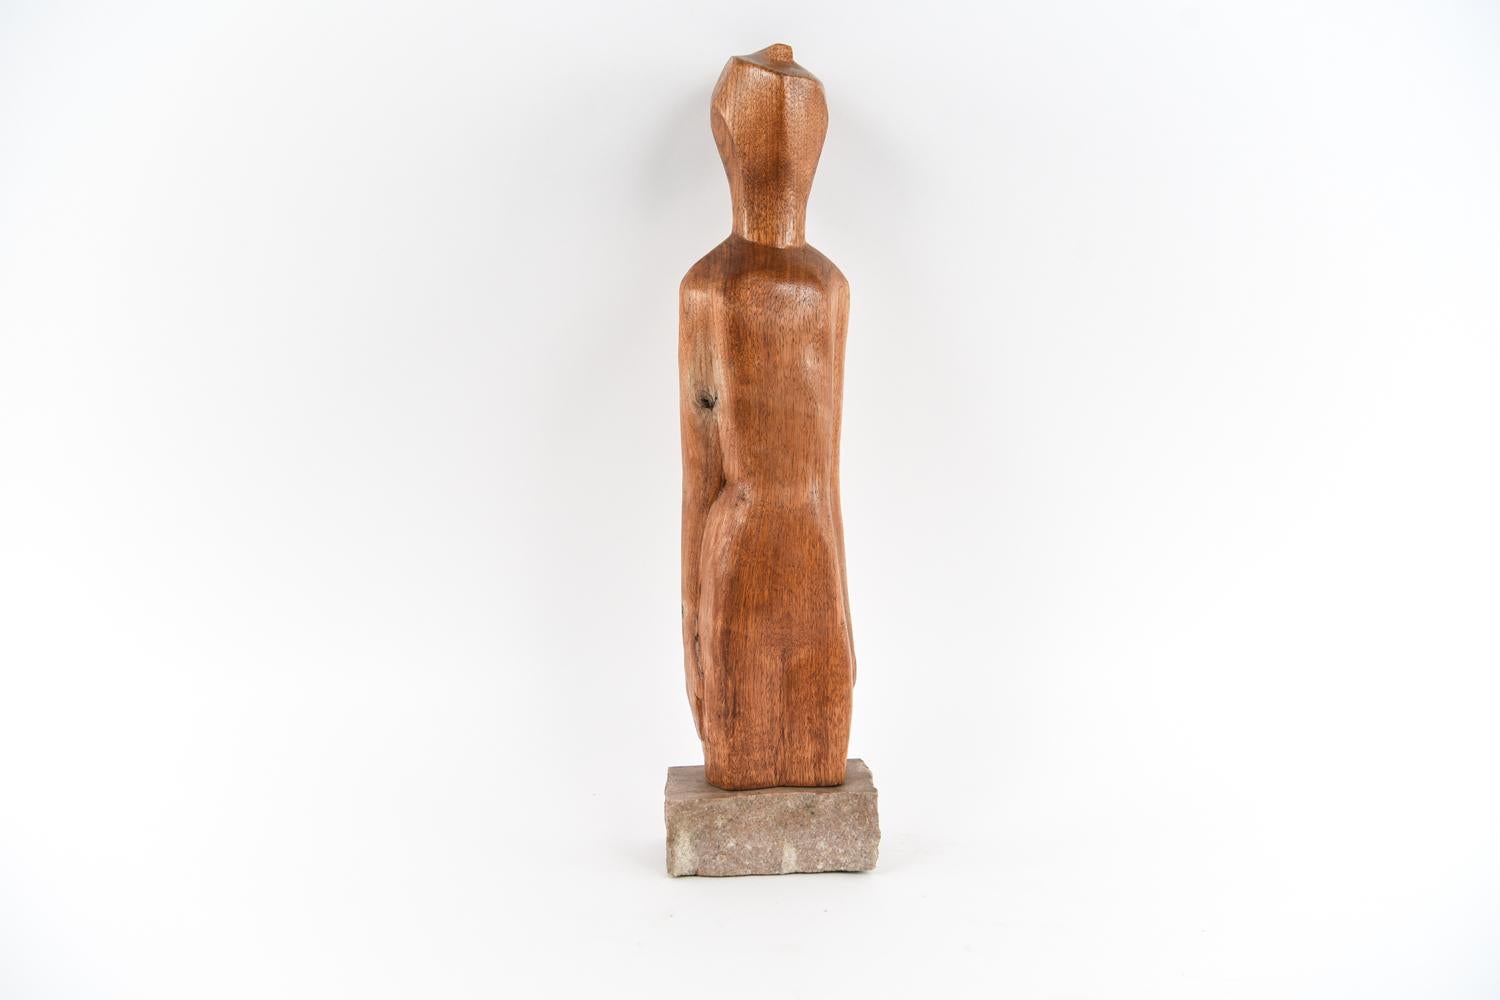 Elaine Kaufman Feiner, American (b. 1922).
Carved wood sculpture on stone base, circa 1960s. Apparently unsigned.
The poignant simplicity in this figurative tabletop sculpture evokes a palpable feeling of hope. A New York City native, Kaufman